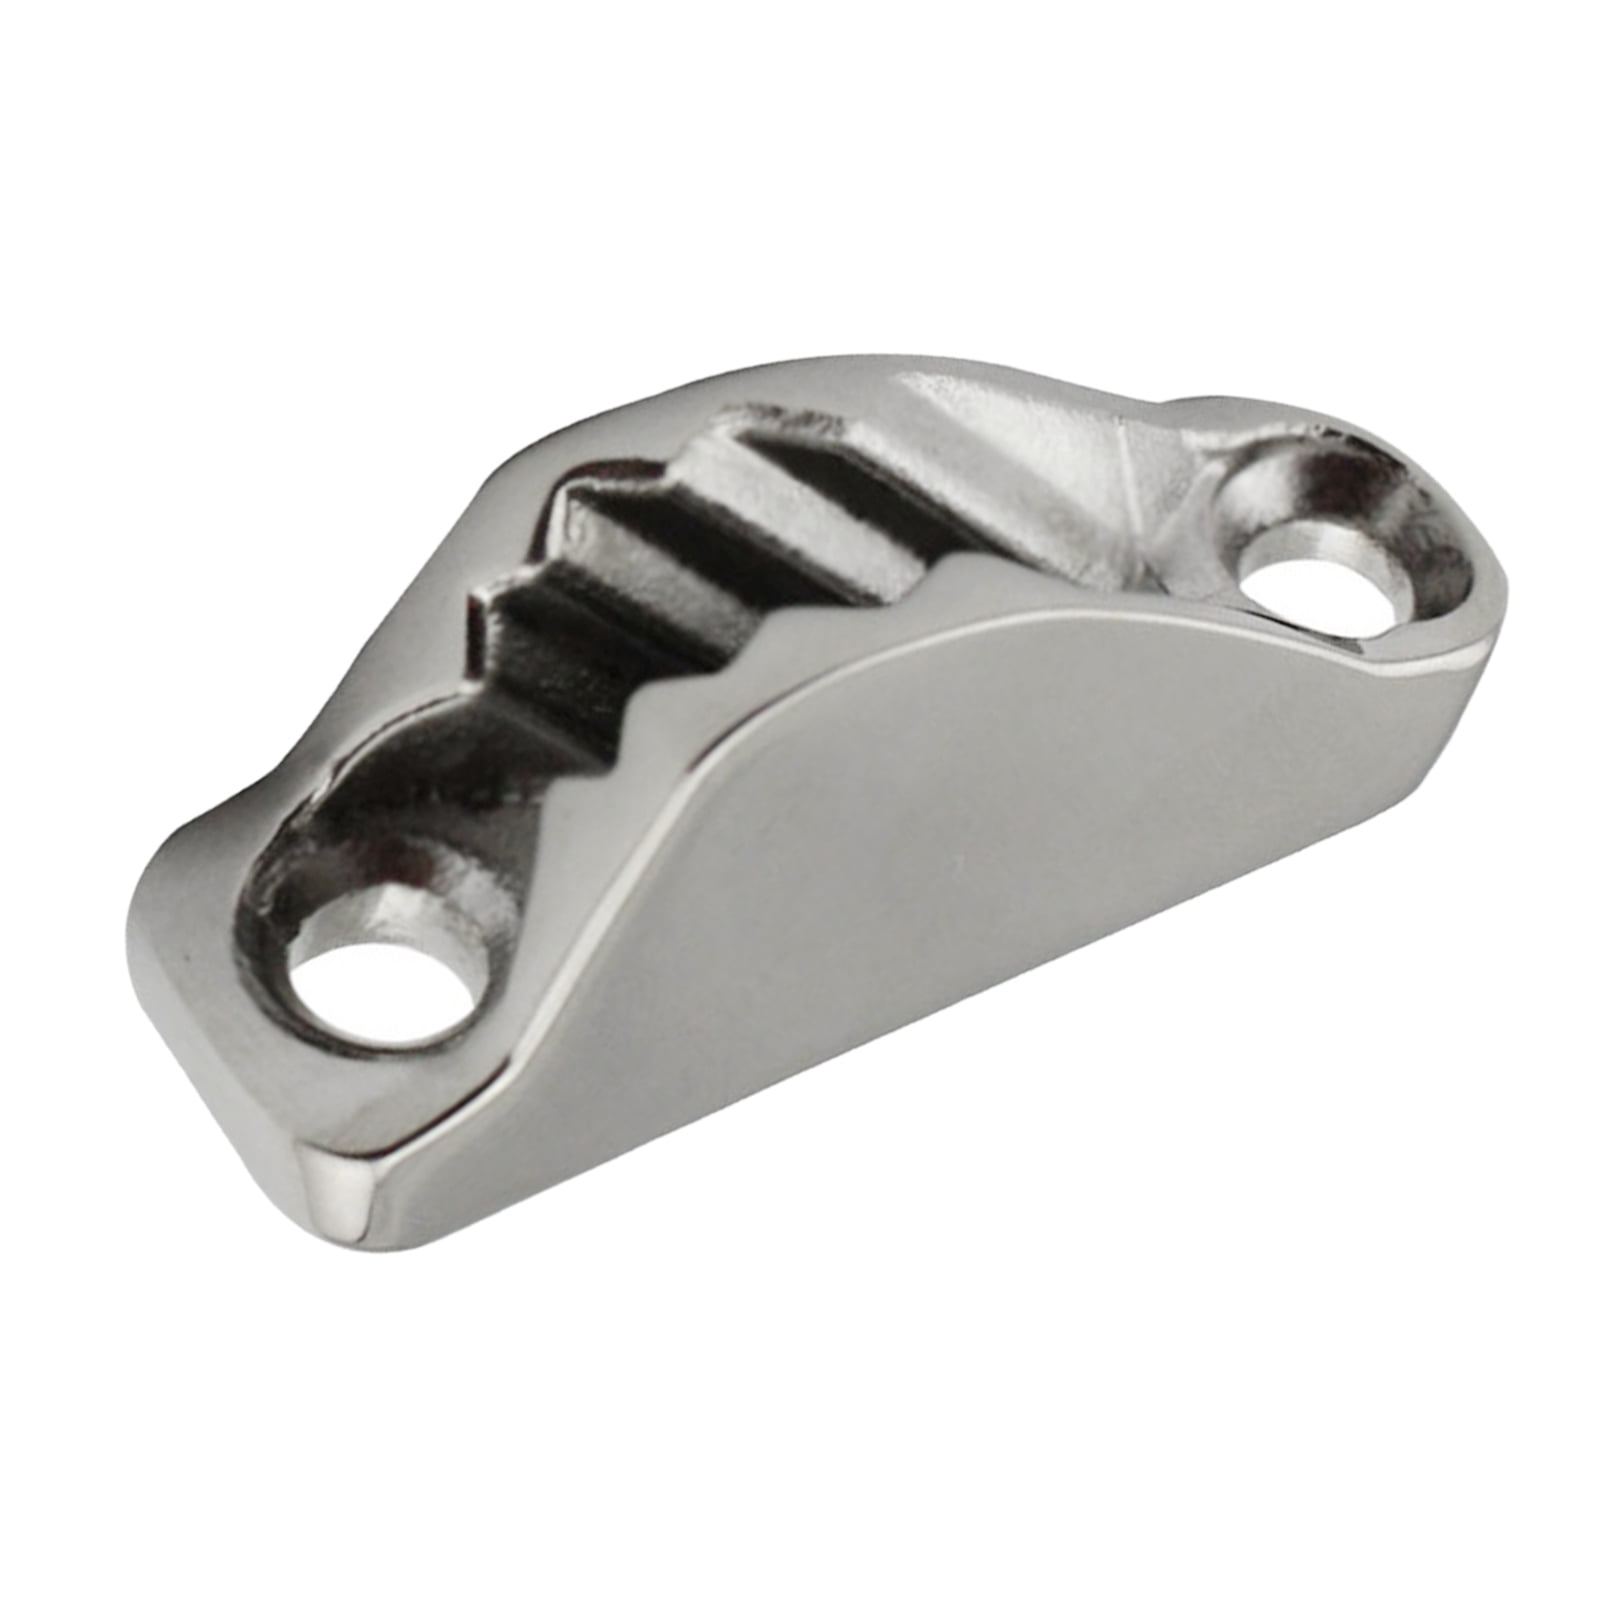 Stainless Steel Boat Clam Cleat Rope Cleat Jam Cleat Open Cleat 